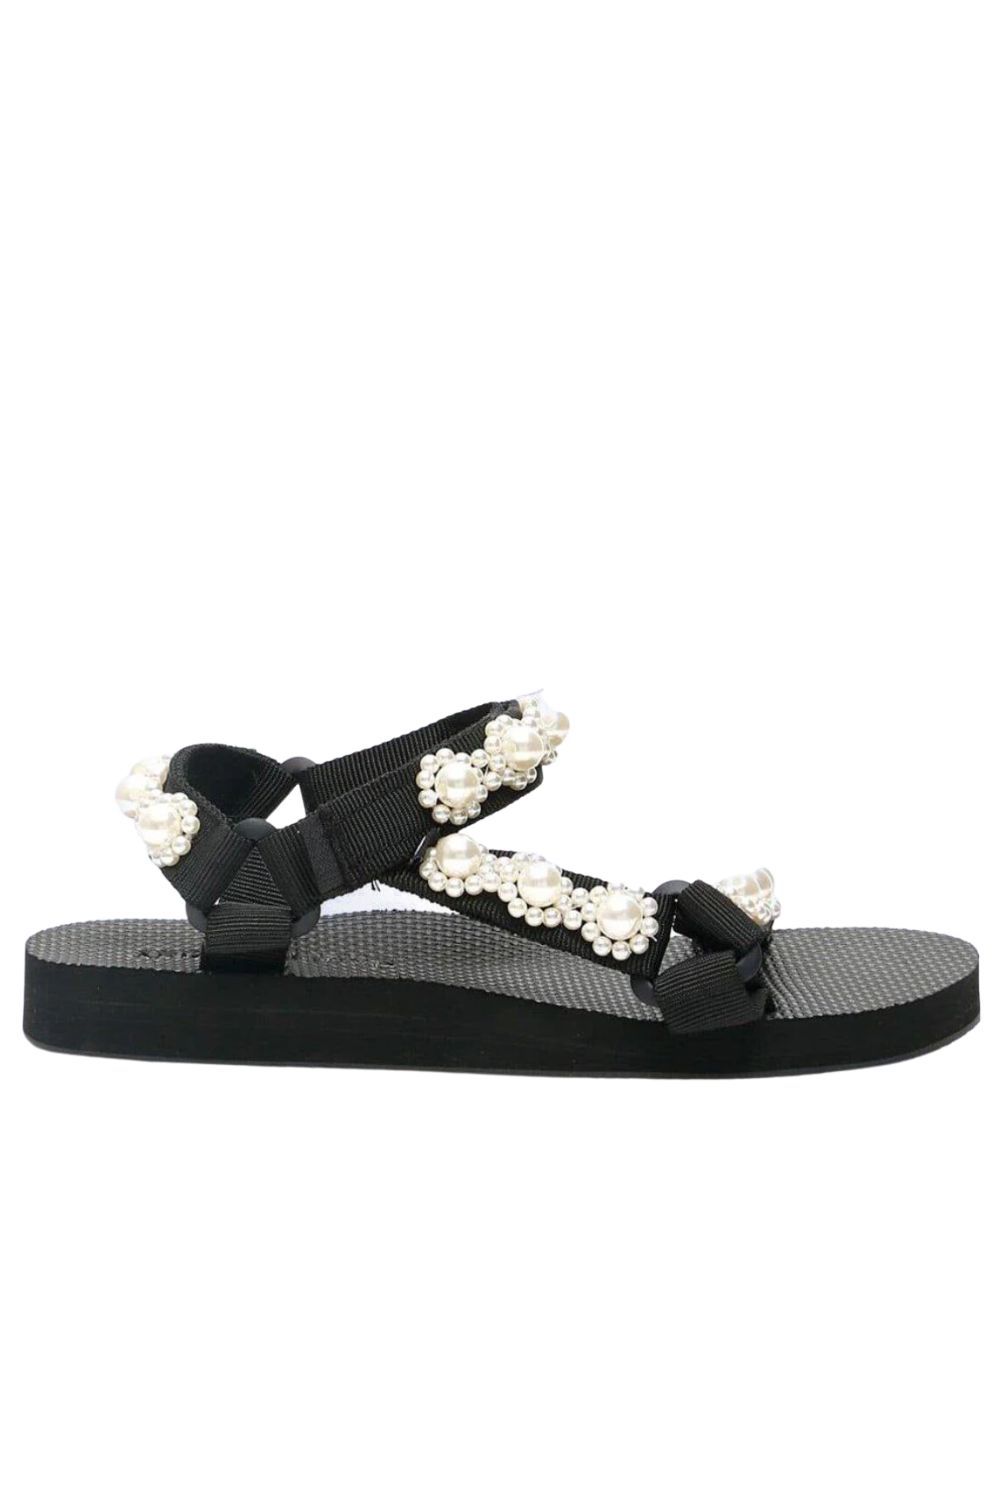 24 Of The Best Summer Sandals Ladies Summer Sandals To Buy Now Marie